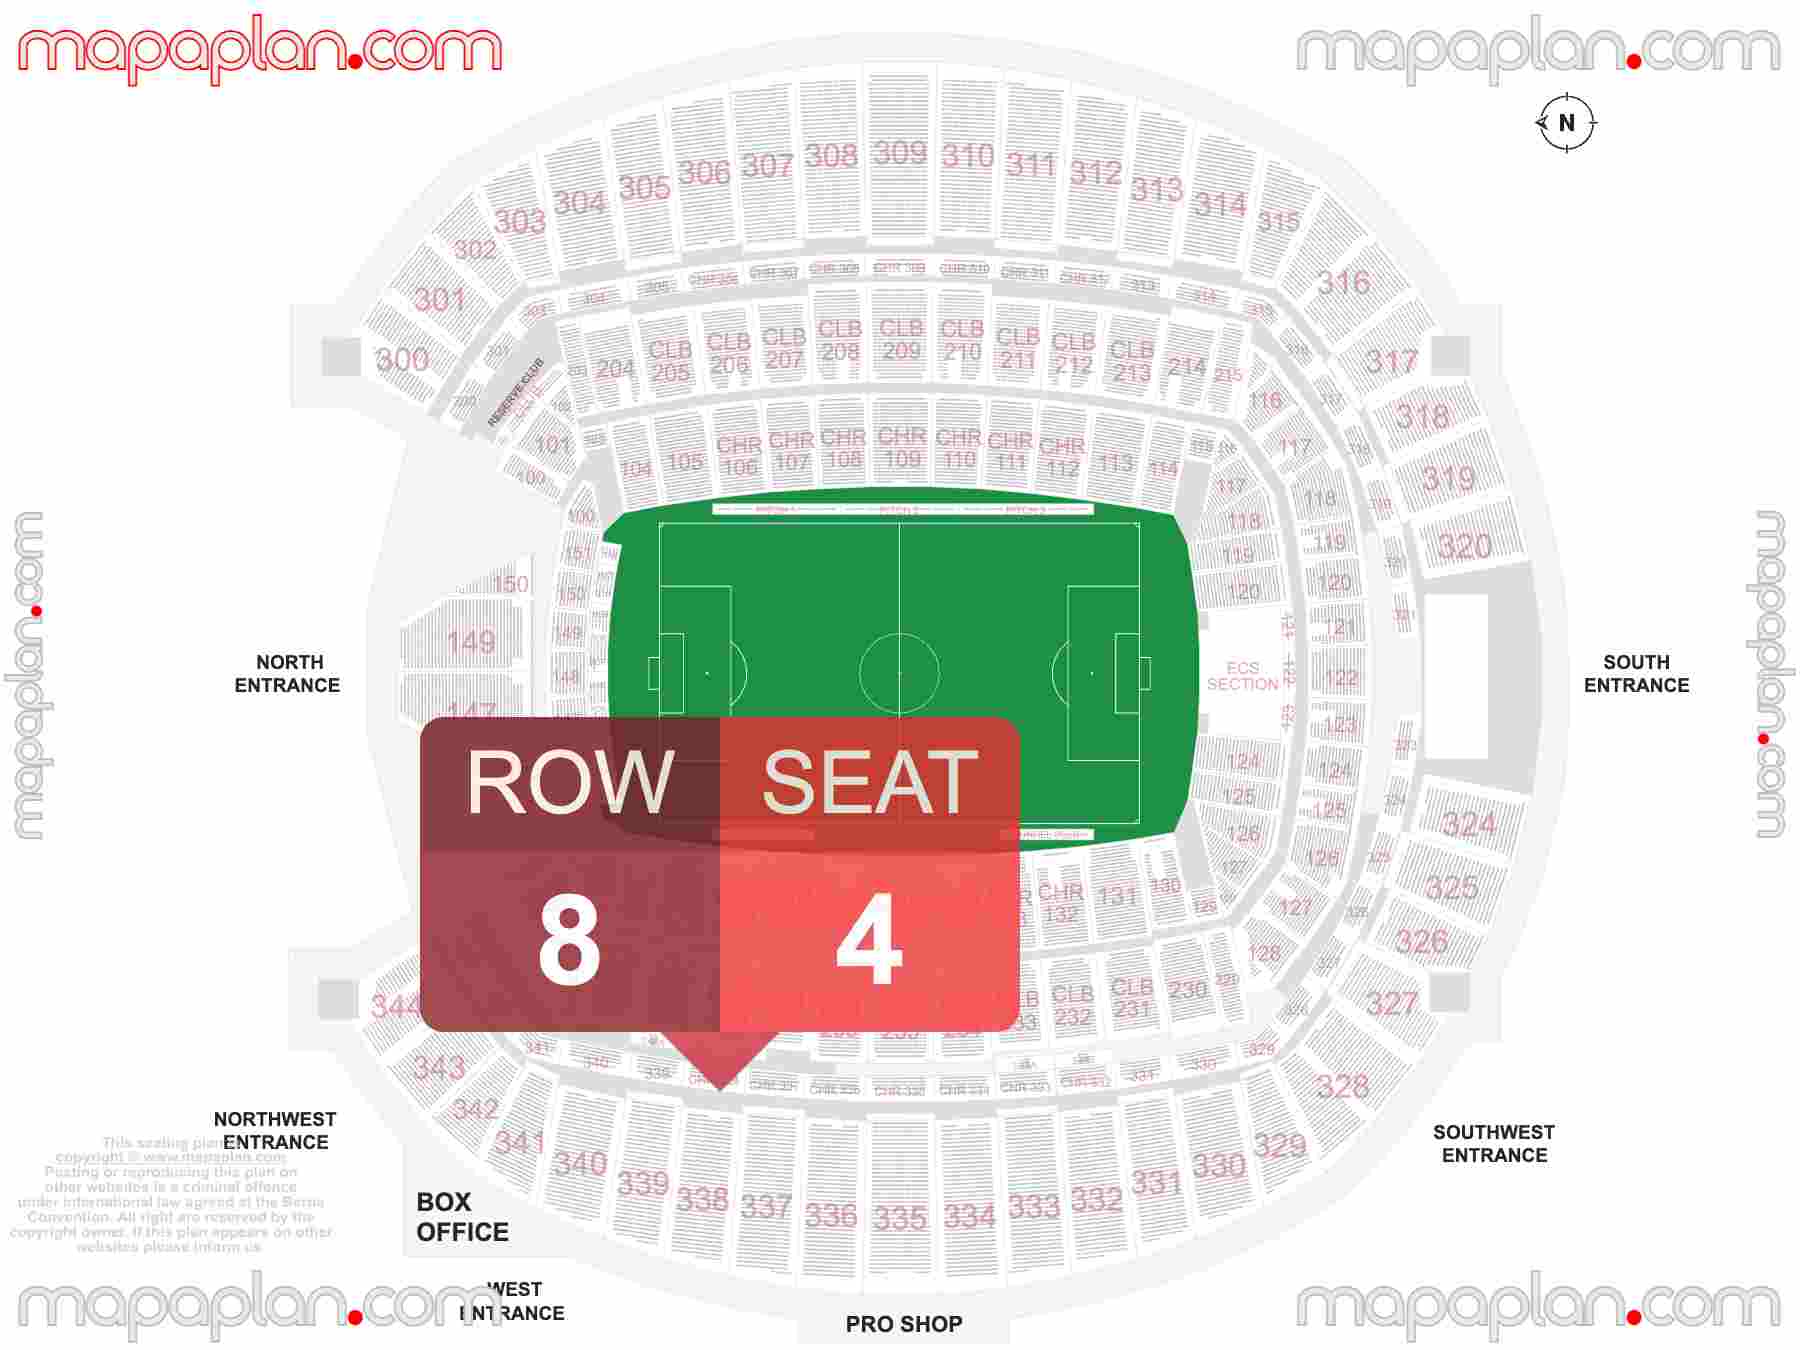 Seattle Lumen Field seating chart Sounders Soccer & Seahawks football inside capacity view arrangement plan - Interactive virtual 3d best seats & rows detailed stadium image configuration layout